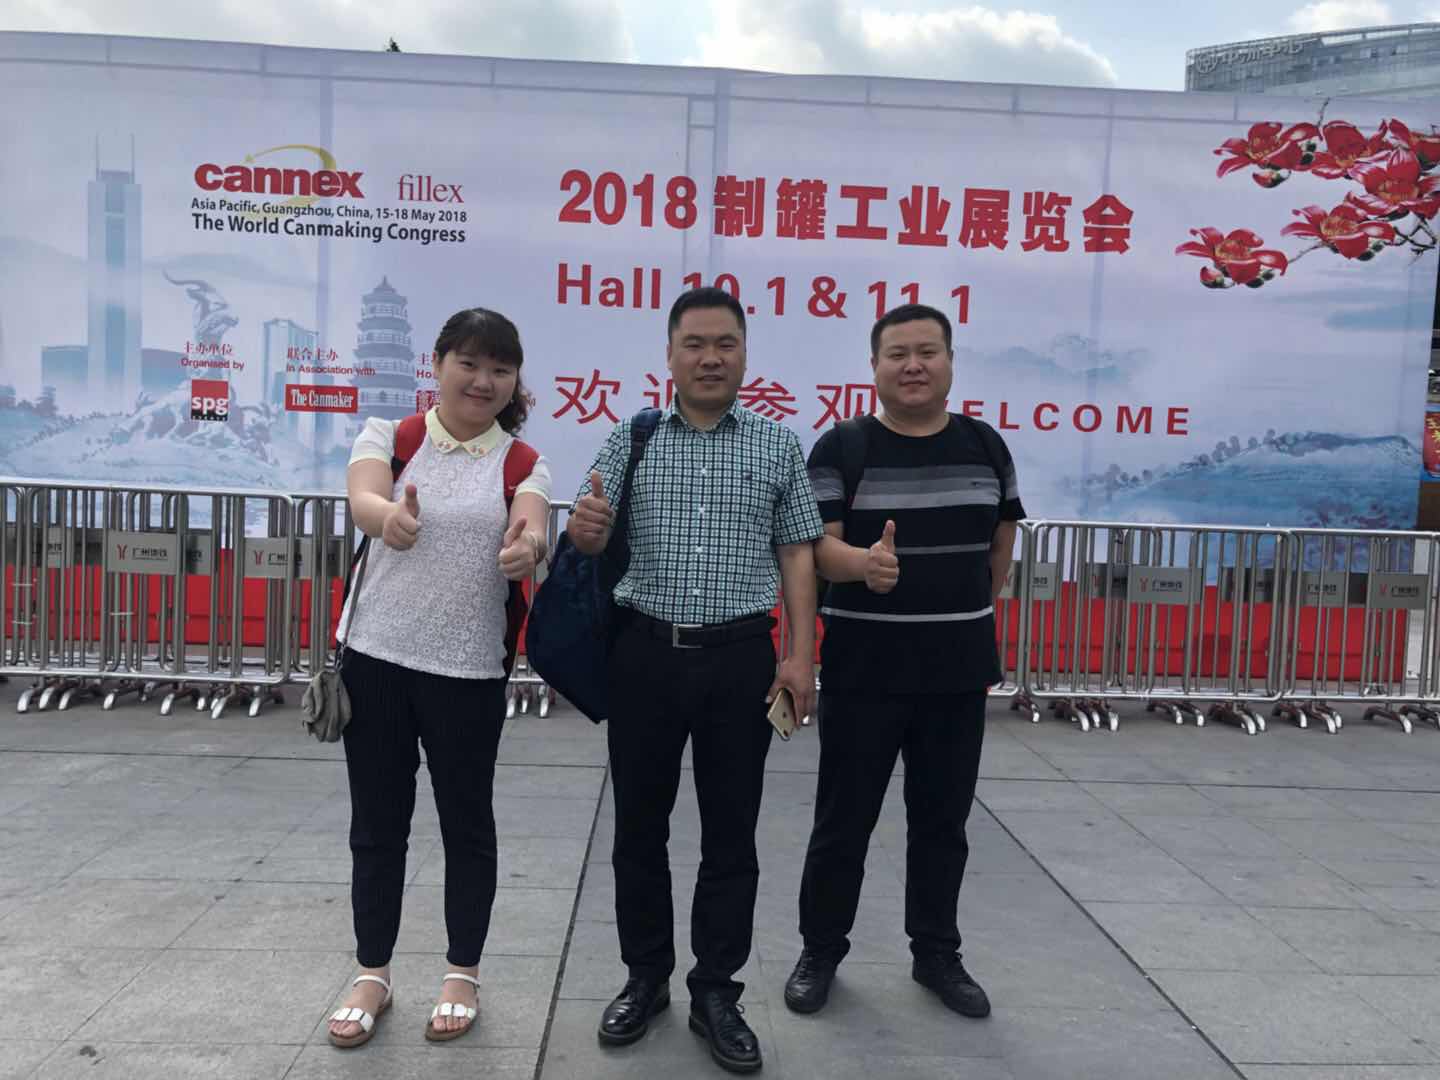 Waiting for you at our booth in Guangzhou—-CANNEX & FILLEX 2018